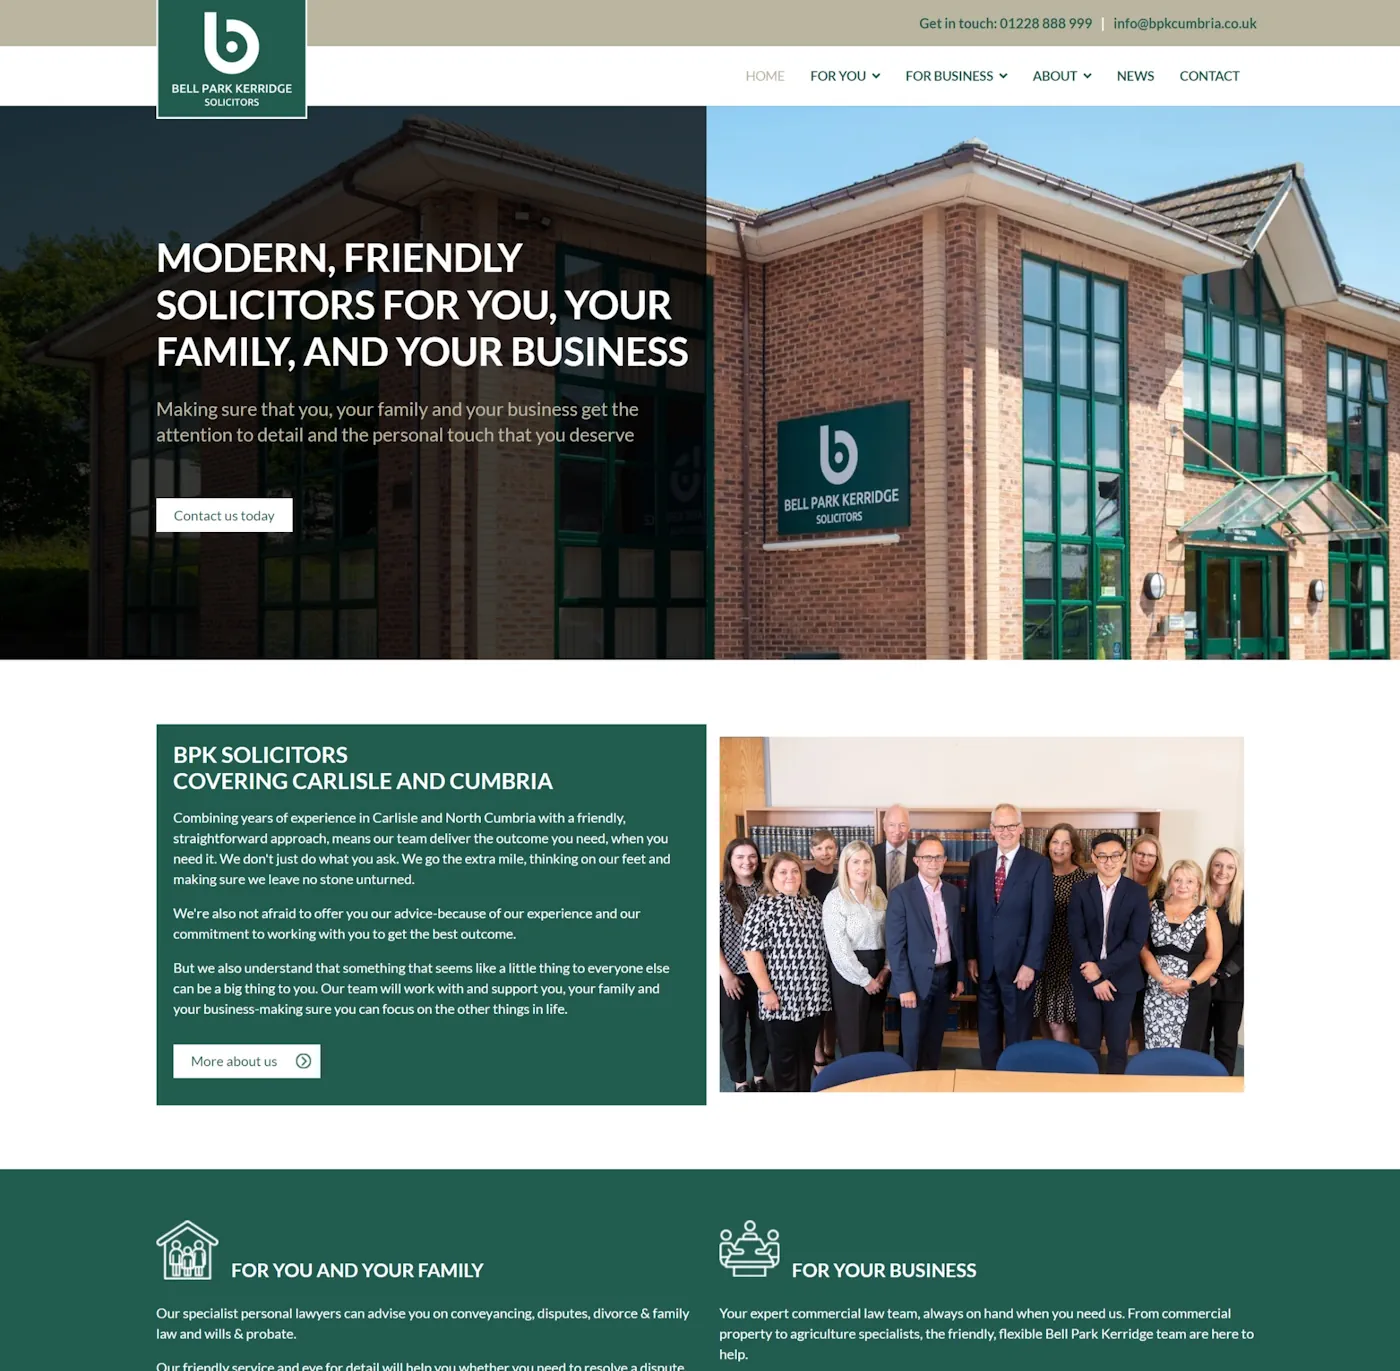 Website design for solicitors in the UK